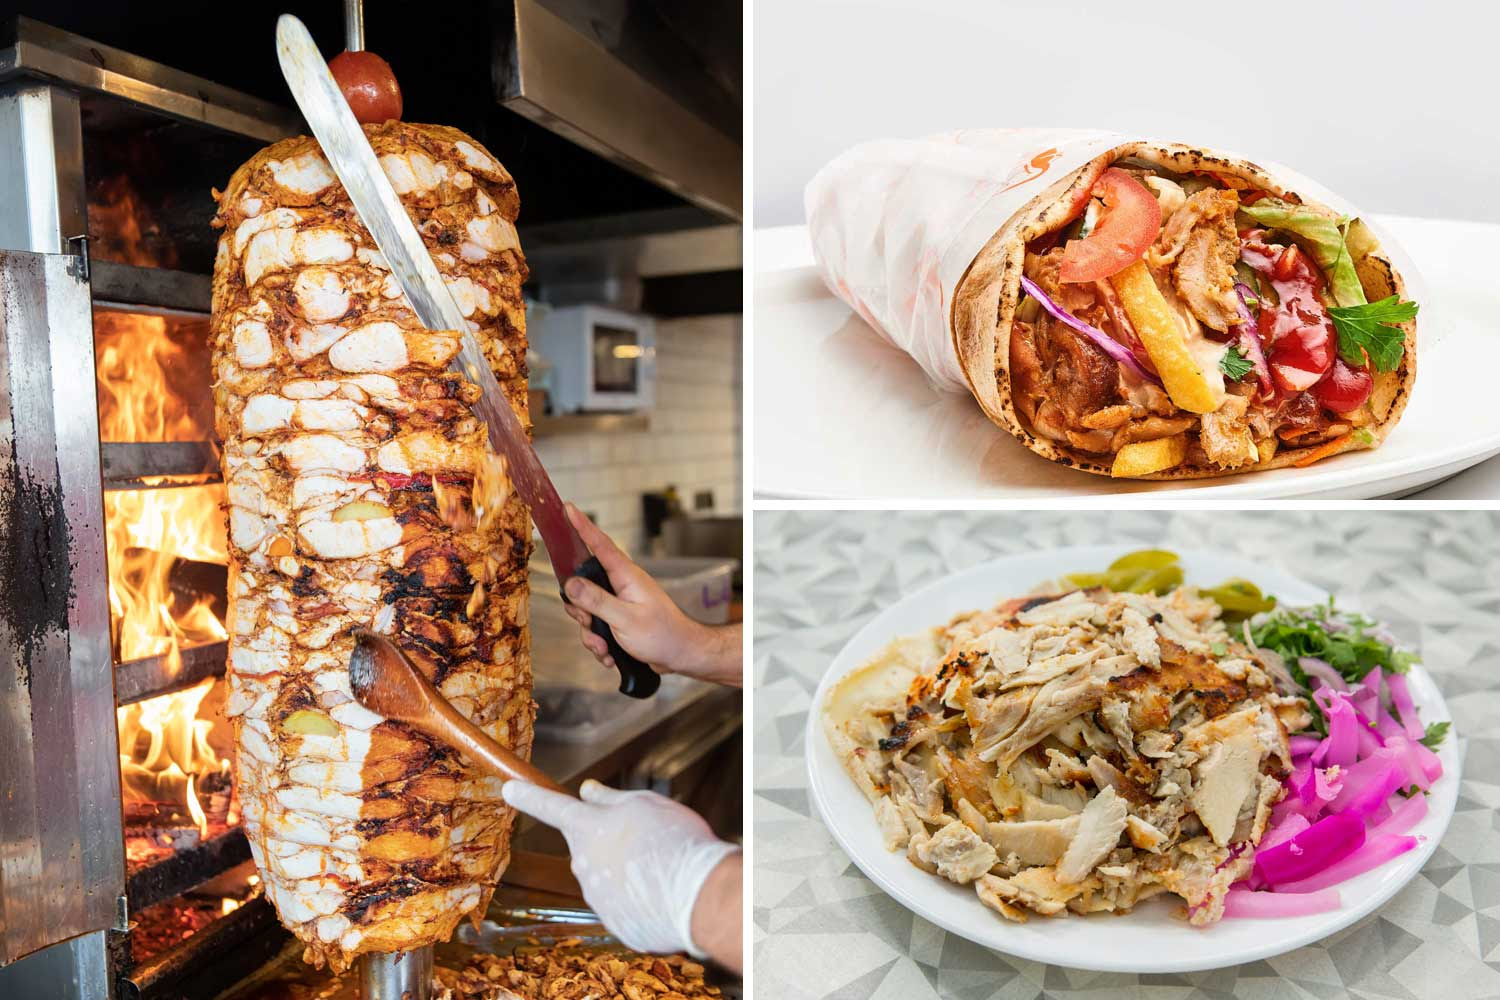 Where to find the best shawarma in Dubai | Restaurants | Time Out Dubai